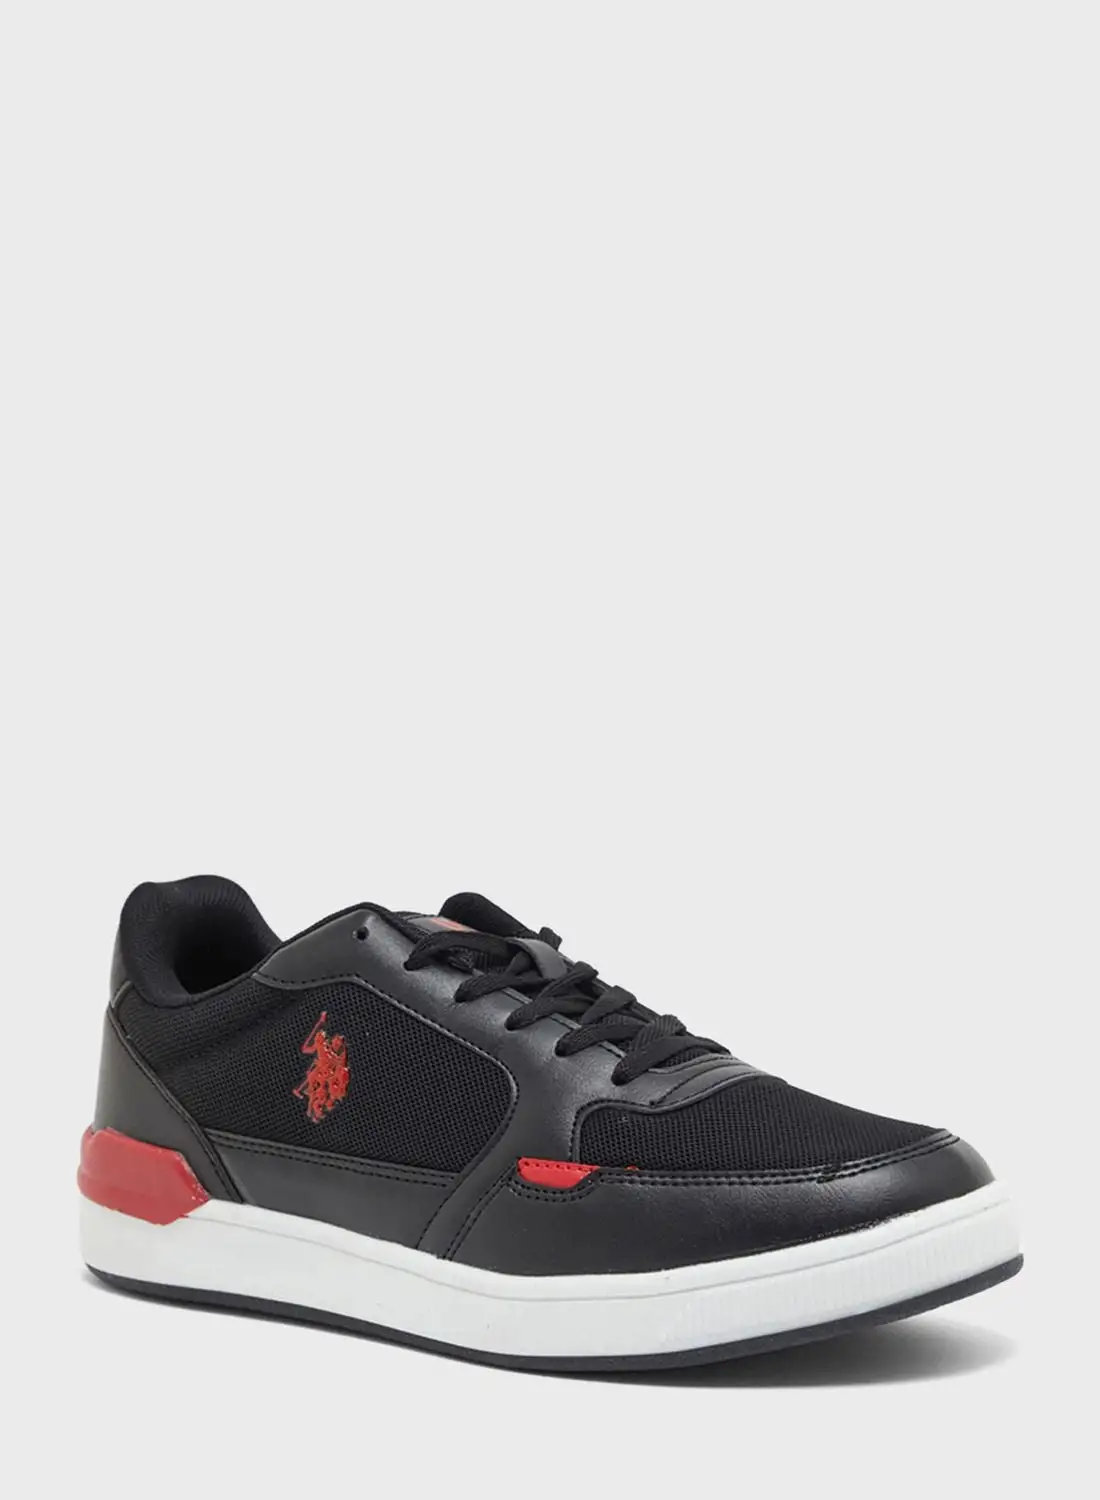 U.S. Polo Assn. Lace Up Low Top Sneakers